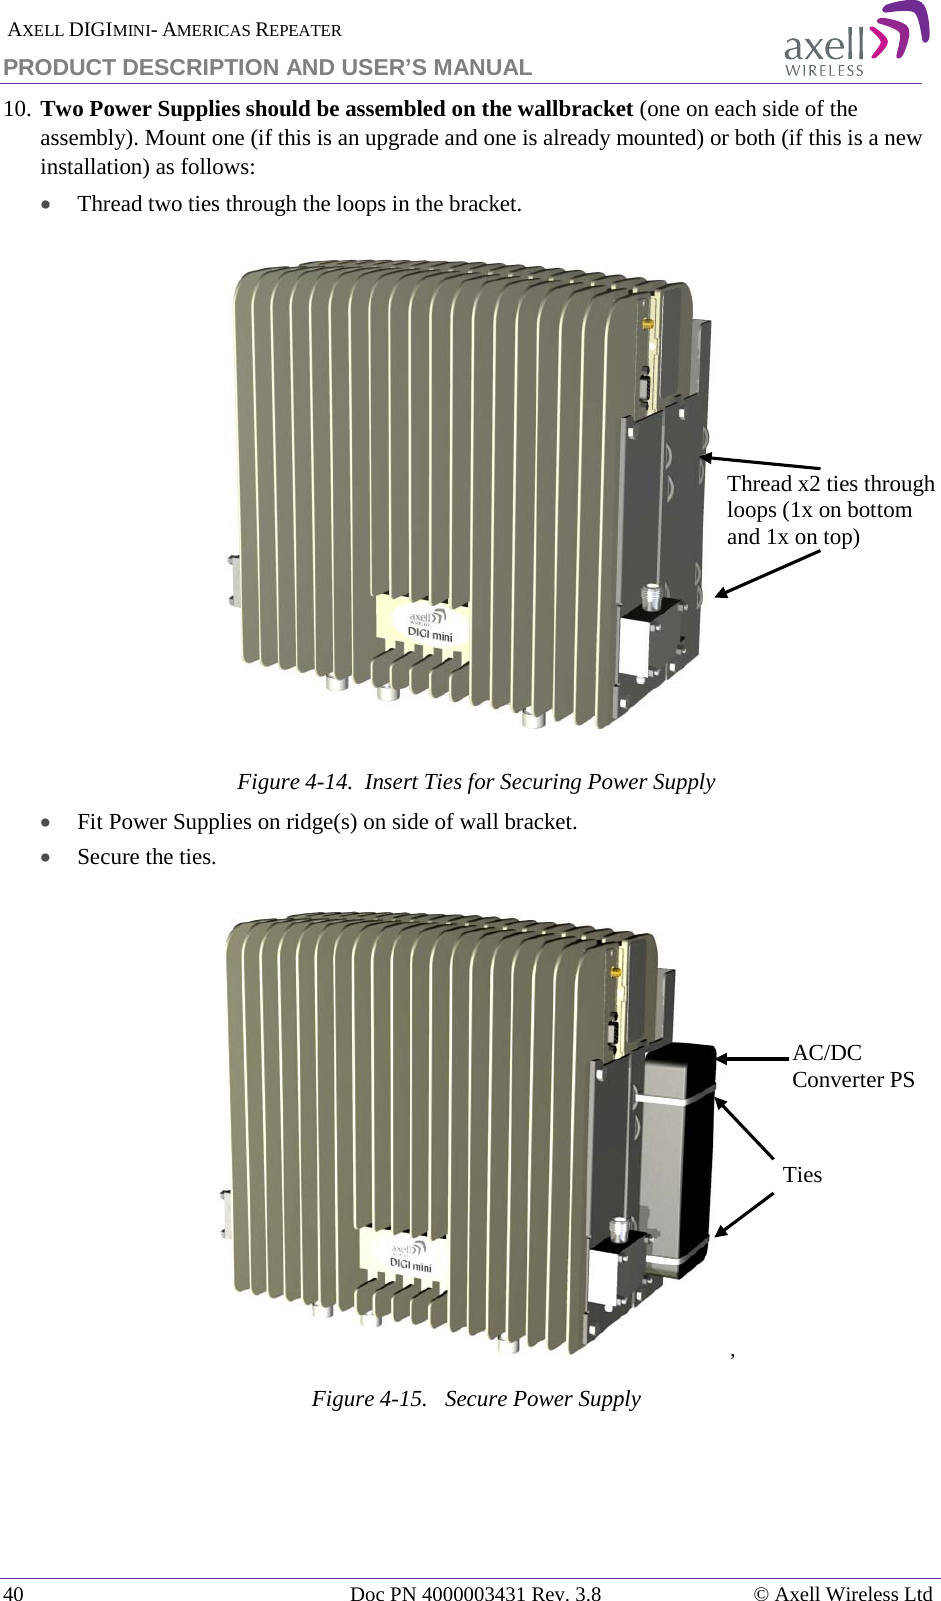  AXELL DIGIMINI- AMERICAS REPEATER PRODUCT DESCRIPTION AND USER’S MANUAL 40   Doc PN 4000003431 Rev. 3.8 © Axell Wireless Ltd 10. Two Power Supplies should be assembled on the wallbracket (one on each side of the assembly). Mount one (if this is an upgrade and one is already mounted) or both (if this is a new installation) as follows:  • Thread two ties through the loops in the bracket.  Figure  4-14.  Insert Ties for Securing Power Supply • Fit Power Supplies on ridge(s) on side of wall bracket. • Secure the ties. ,  Figure  4-15.   Secure Power Supply  Thread x2 ties through loops (1x on bottom and 1x on top) Ties AC/DC Converter PS 